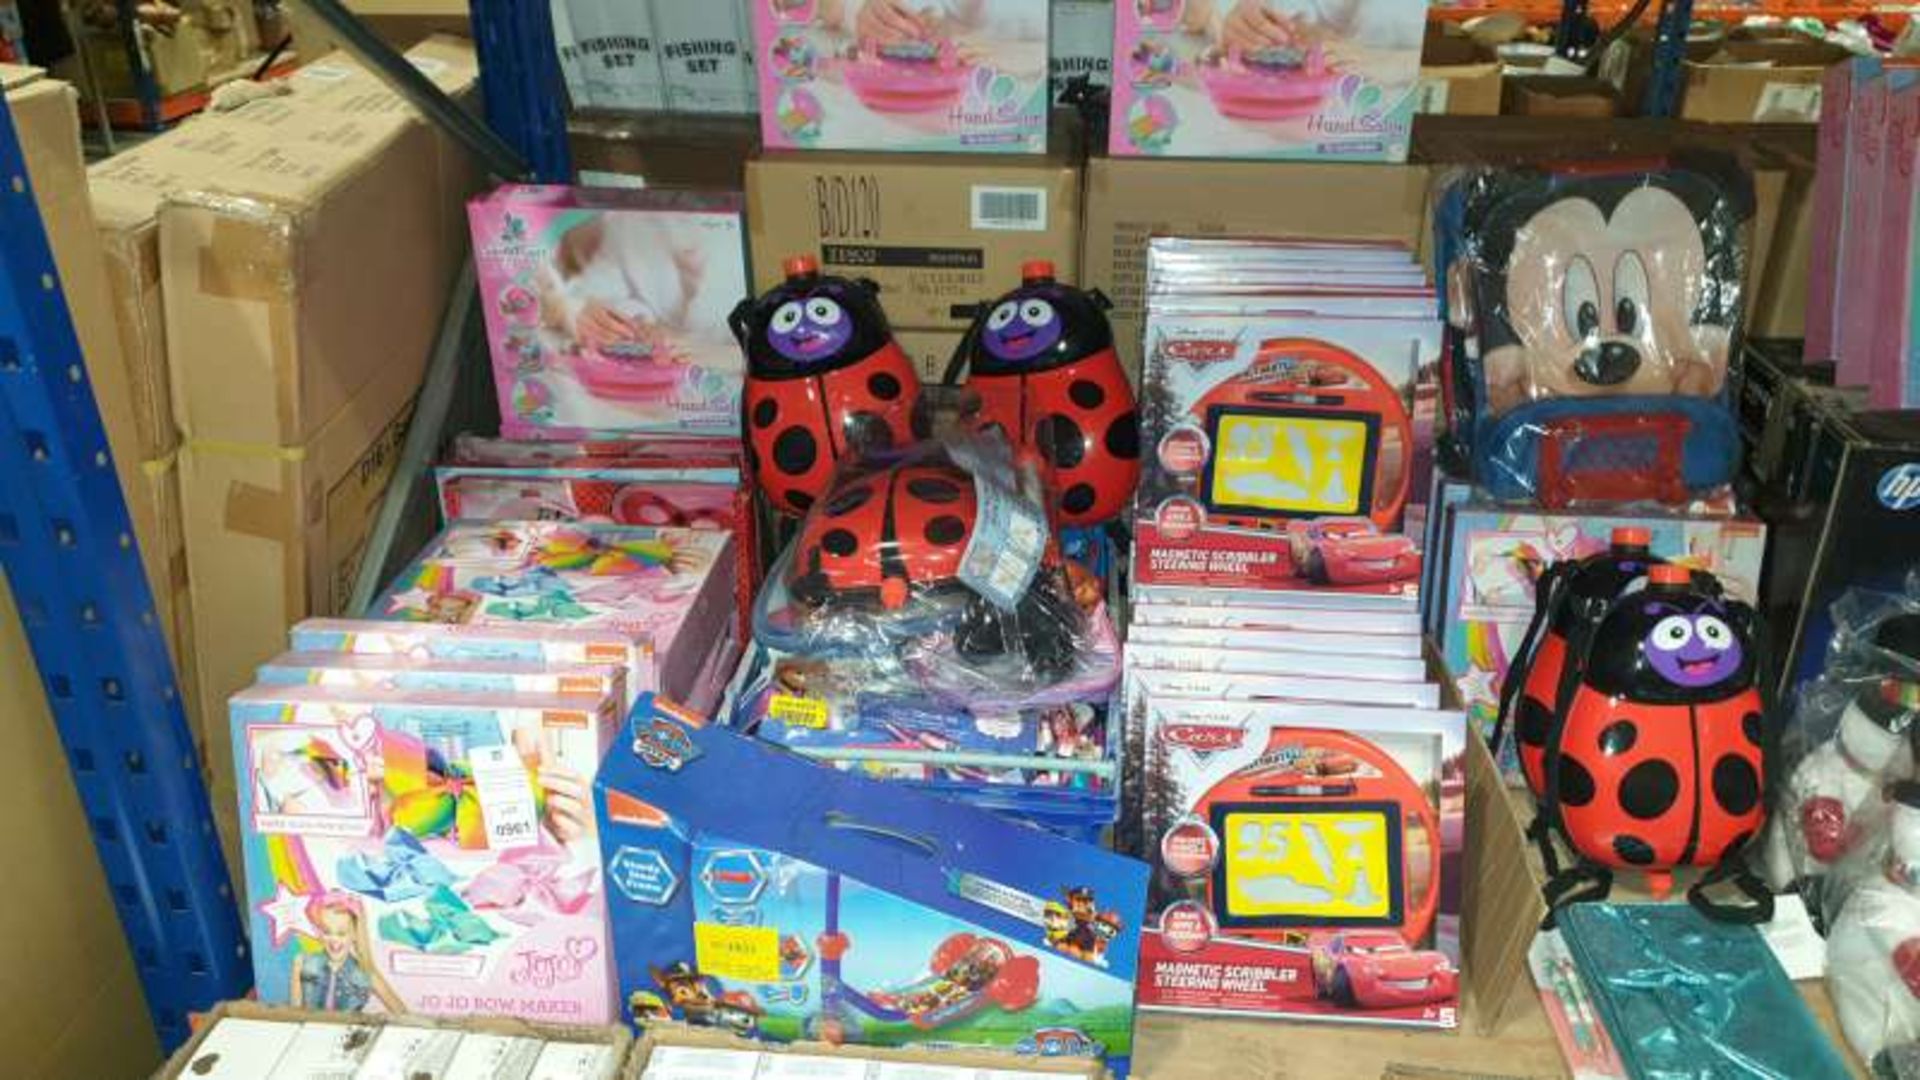 MIXED LOT CONTAINING PAW PATROL SCOOTER, DISNEY CARS MAGNETIC SCRIBBLER WHEELS, JO JO BOW MAKER